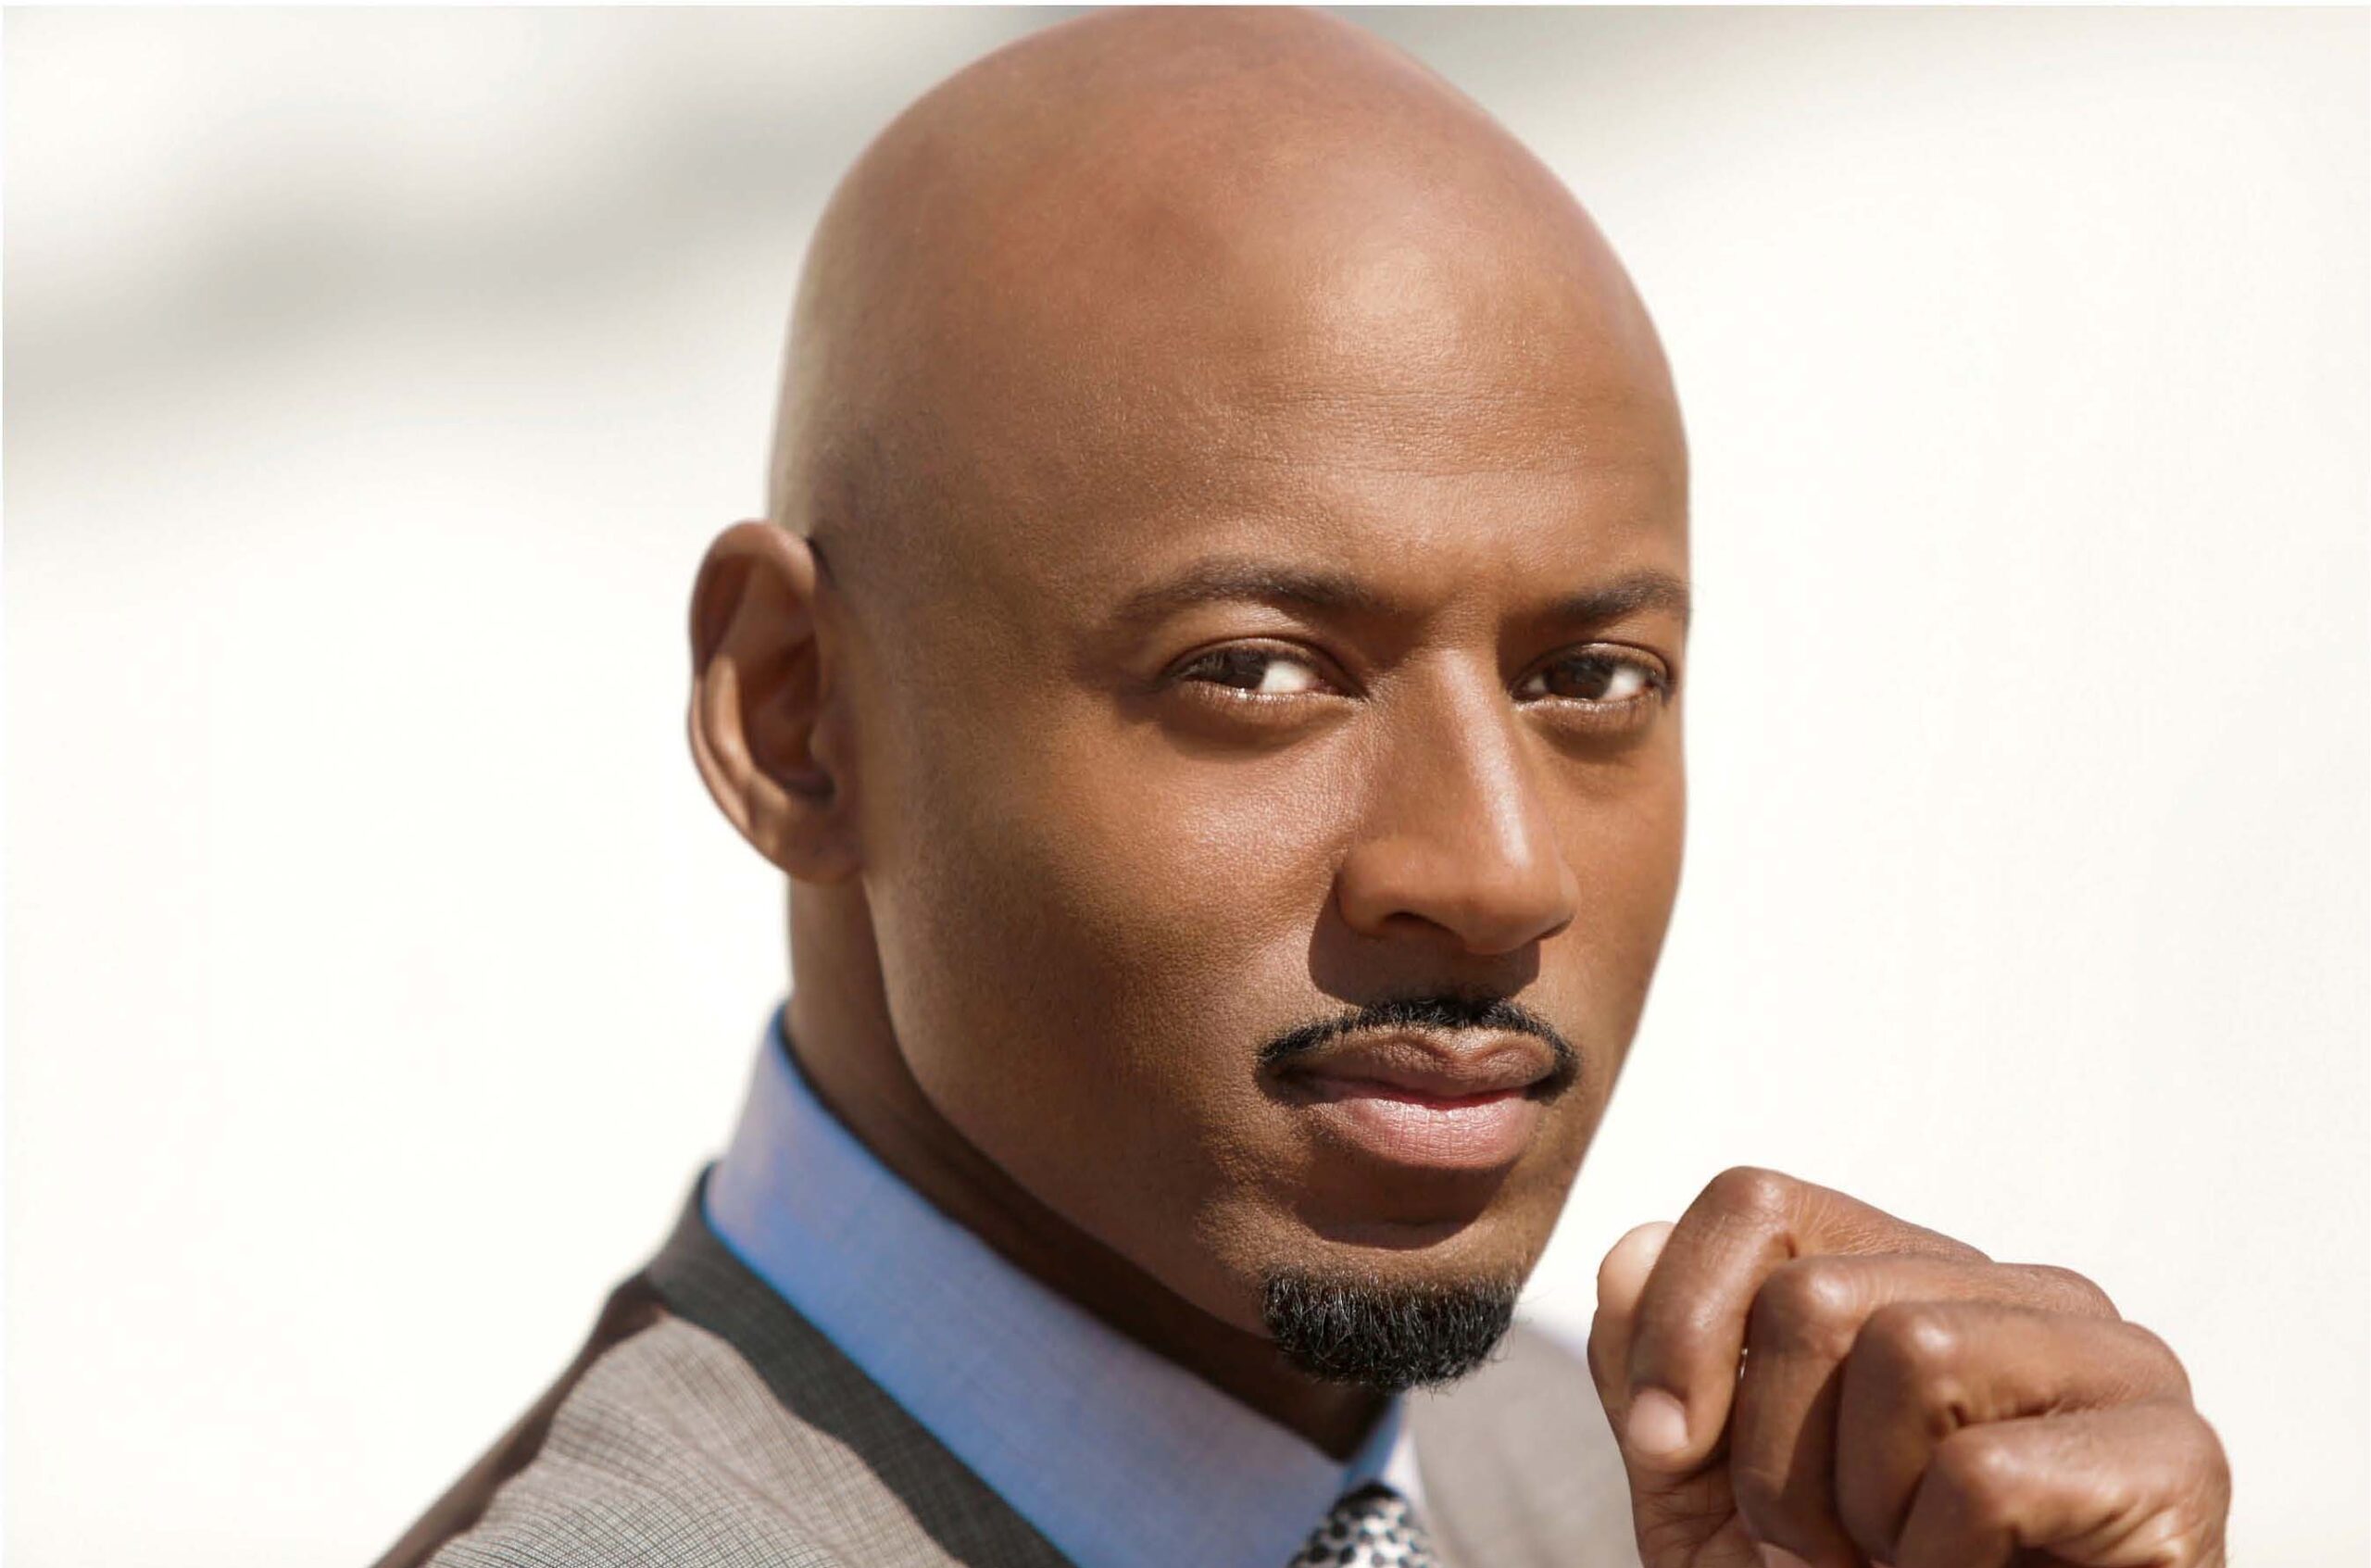 Actor Romany Malco Set to Join Innocence Project as Ambassador